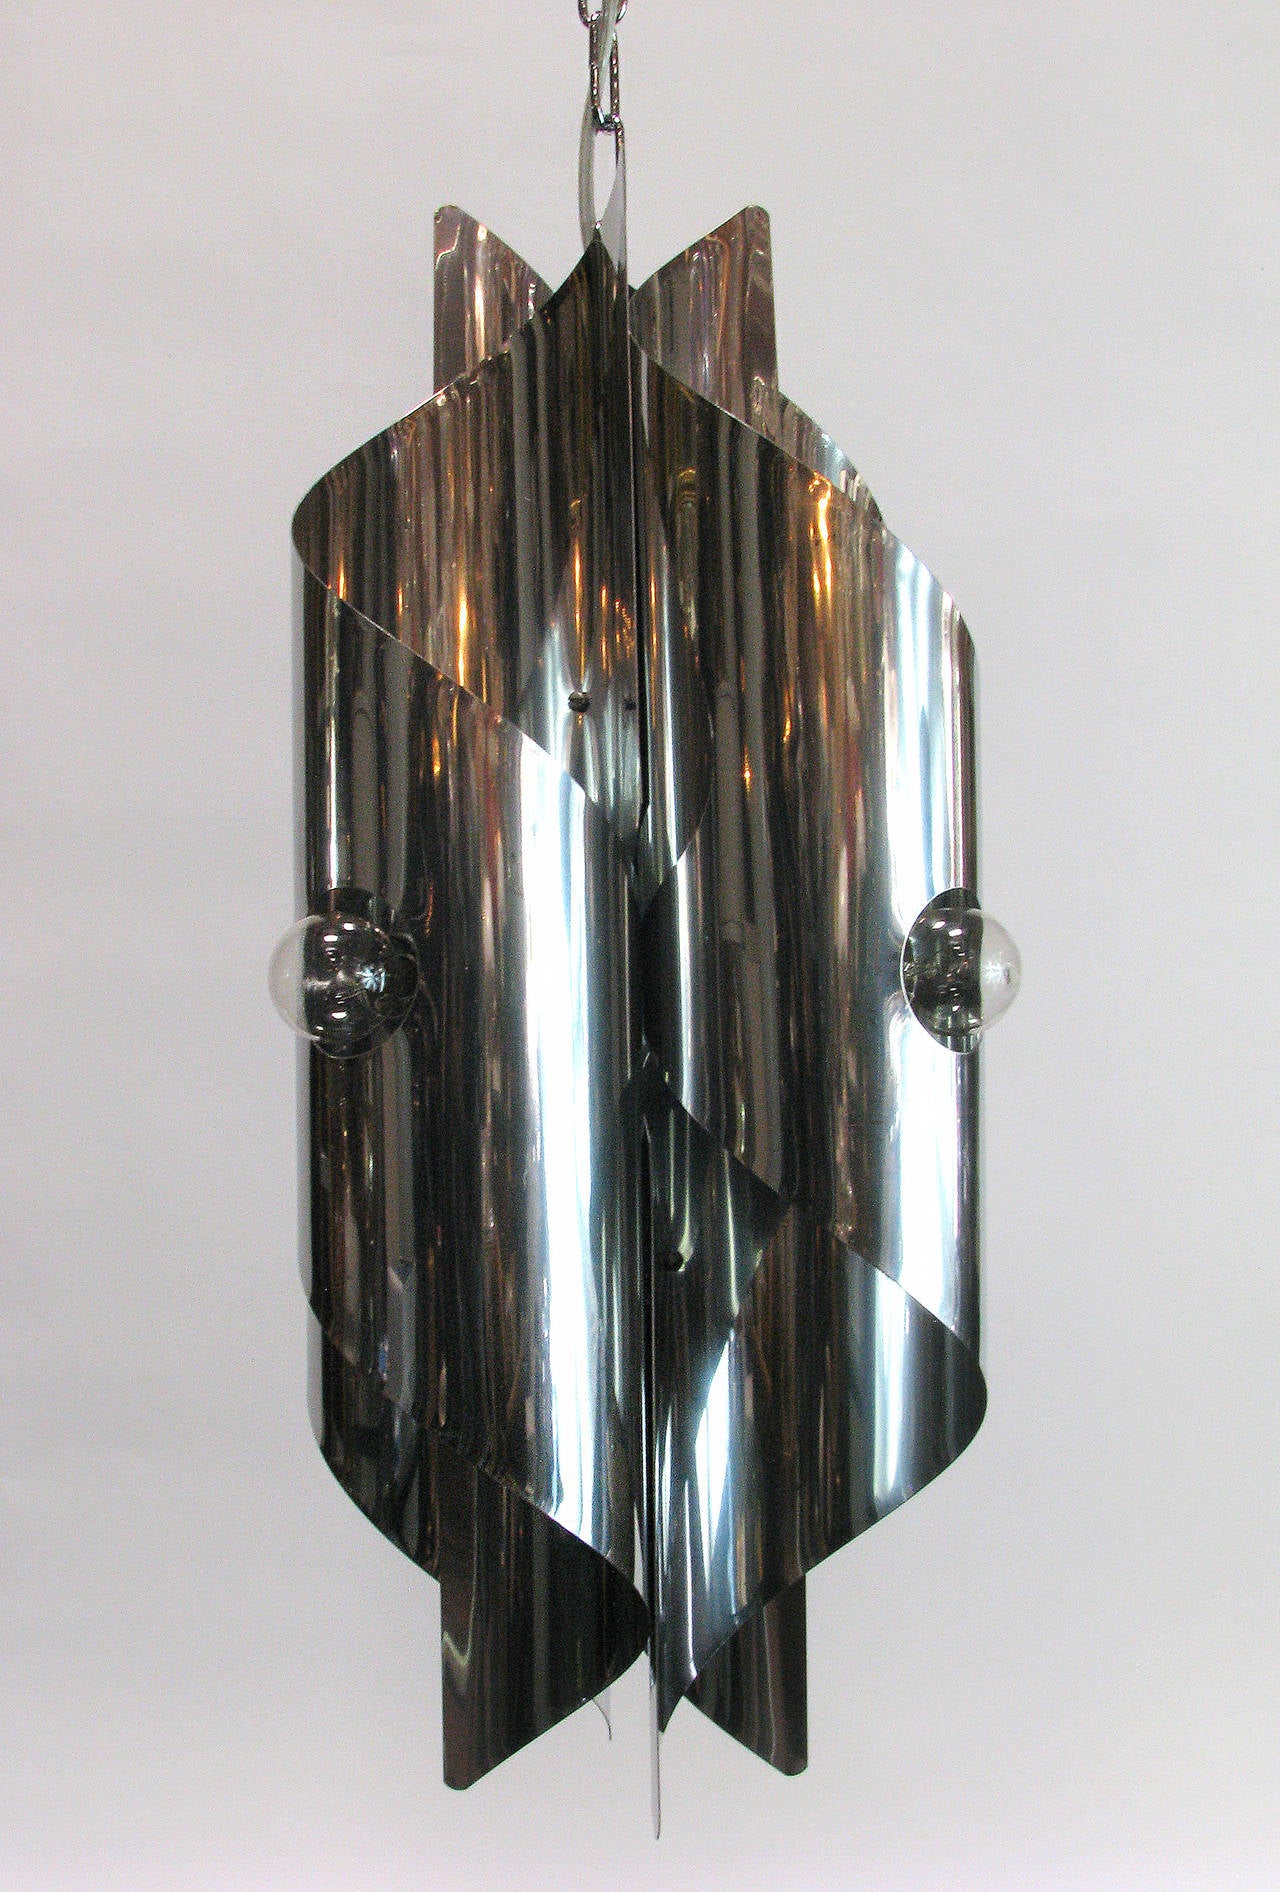 A small chrome spiral chandelier by Gaetano Sciolari. Has four lights. Fixture alone is 21.5